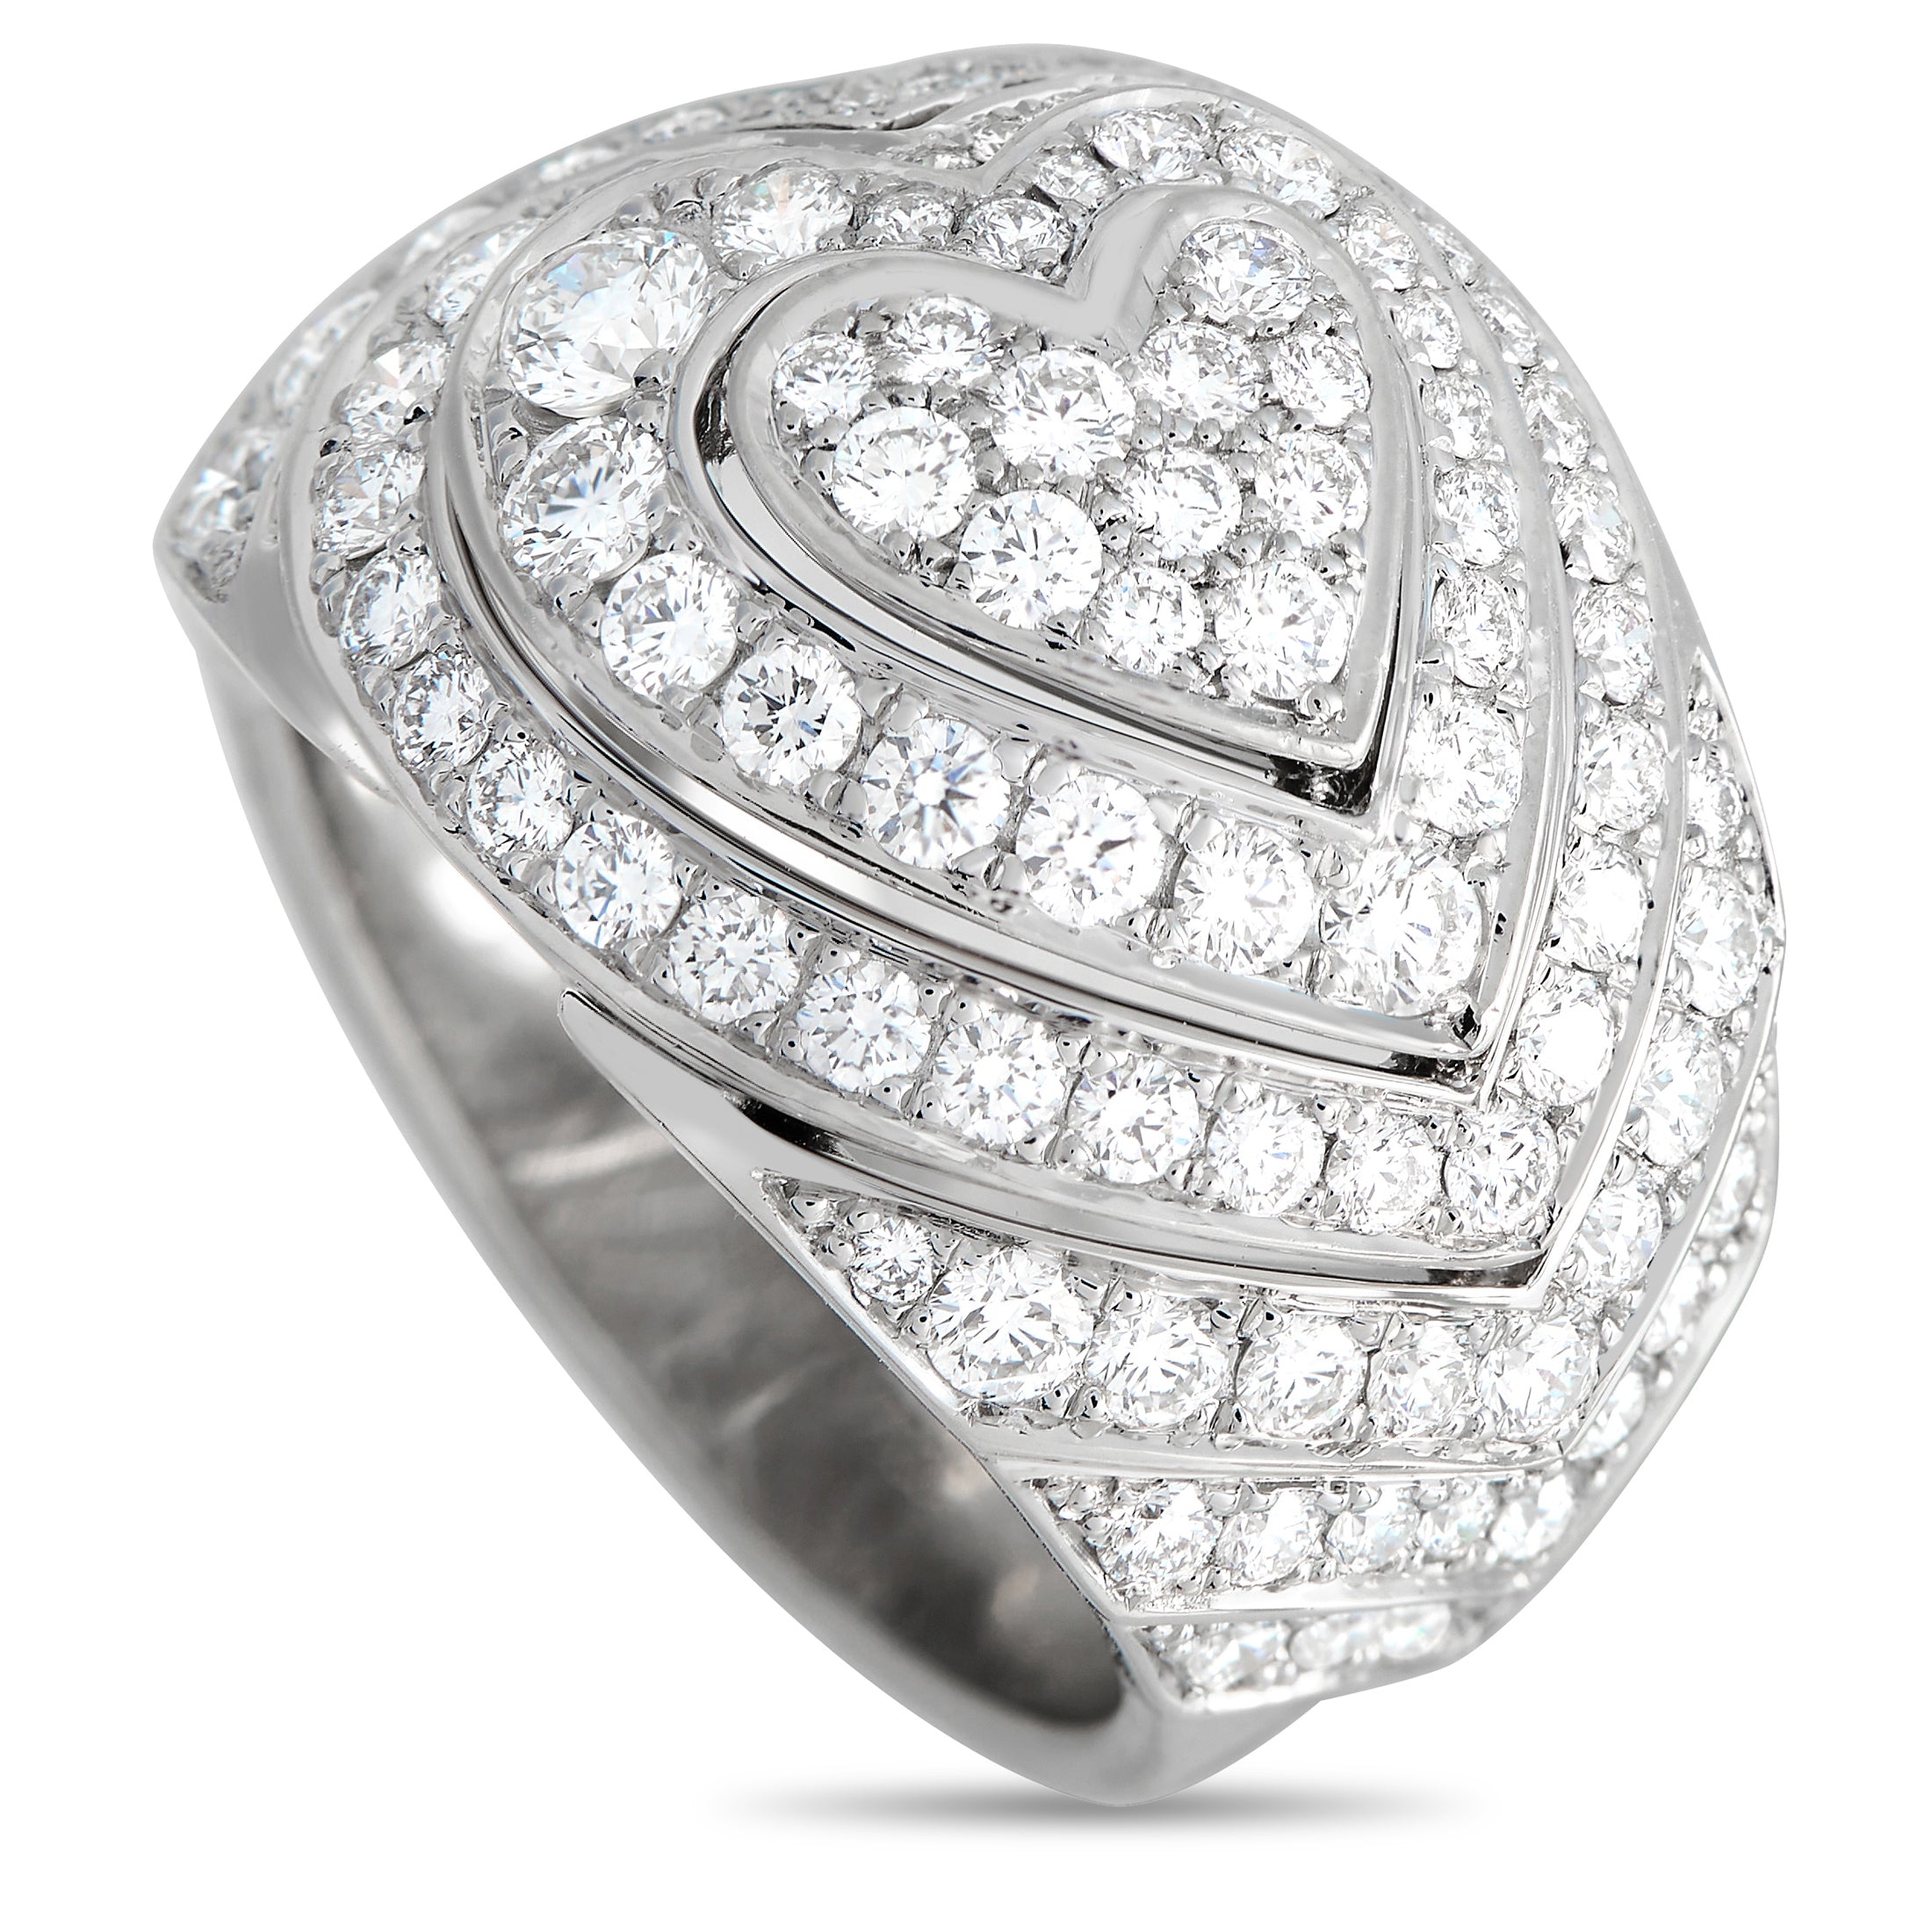 CARTIER Cartier 18K White Gold 2.0ct Diamond Heart Domed Cocktail Ring